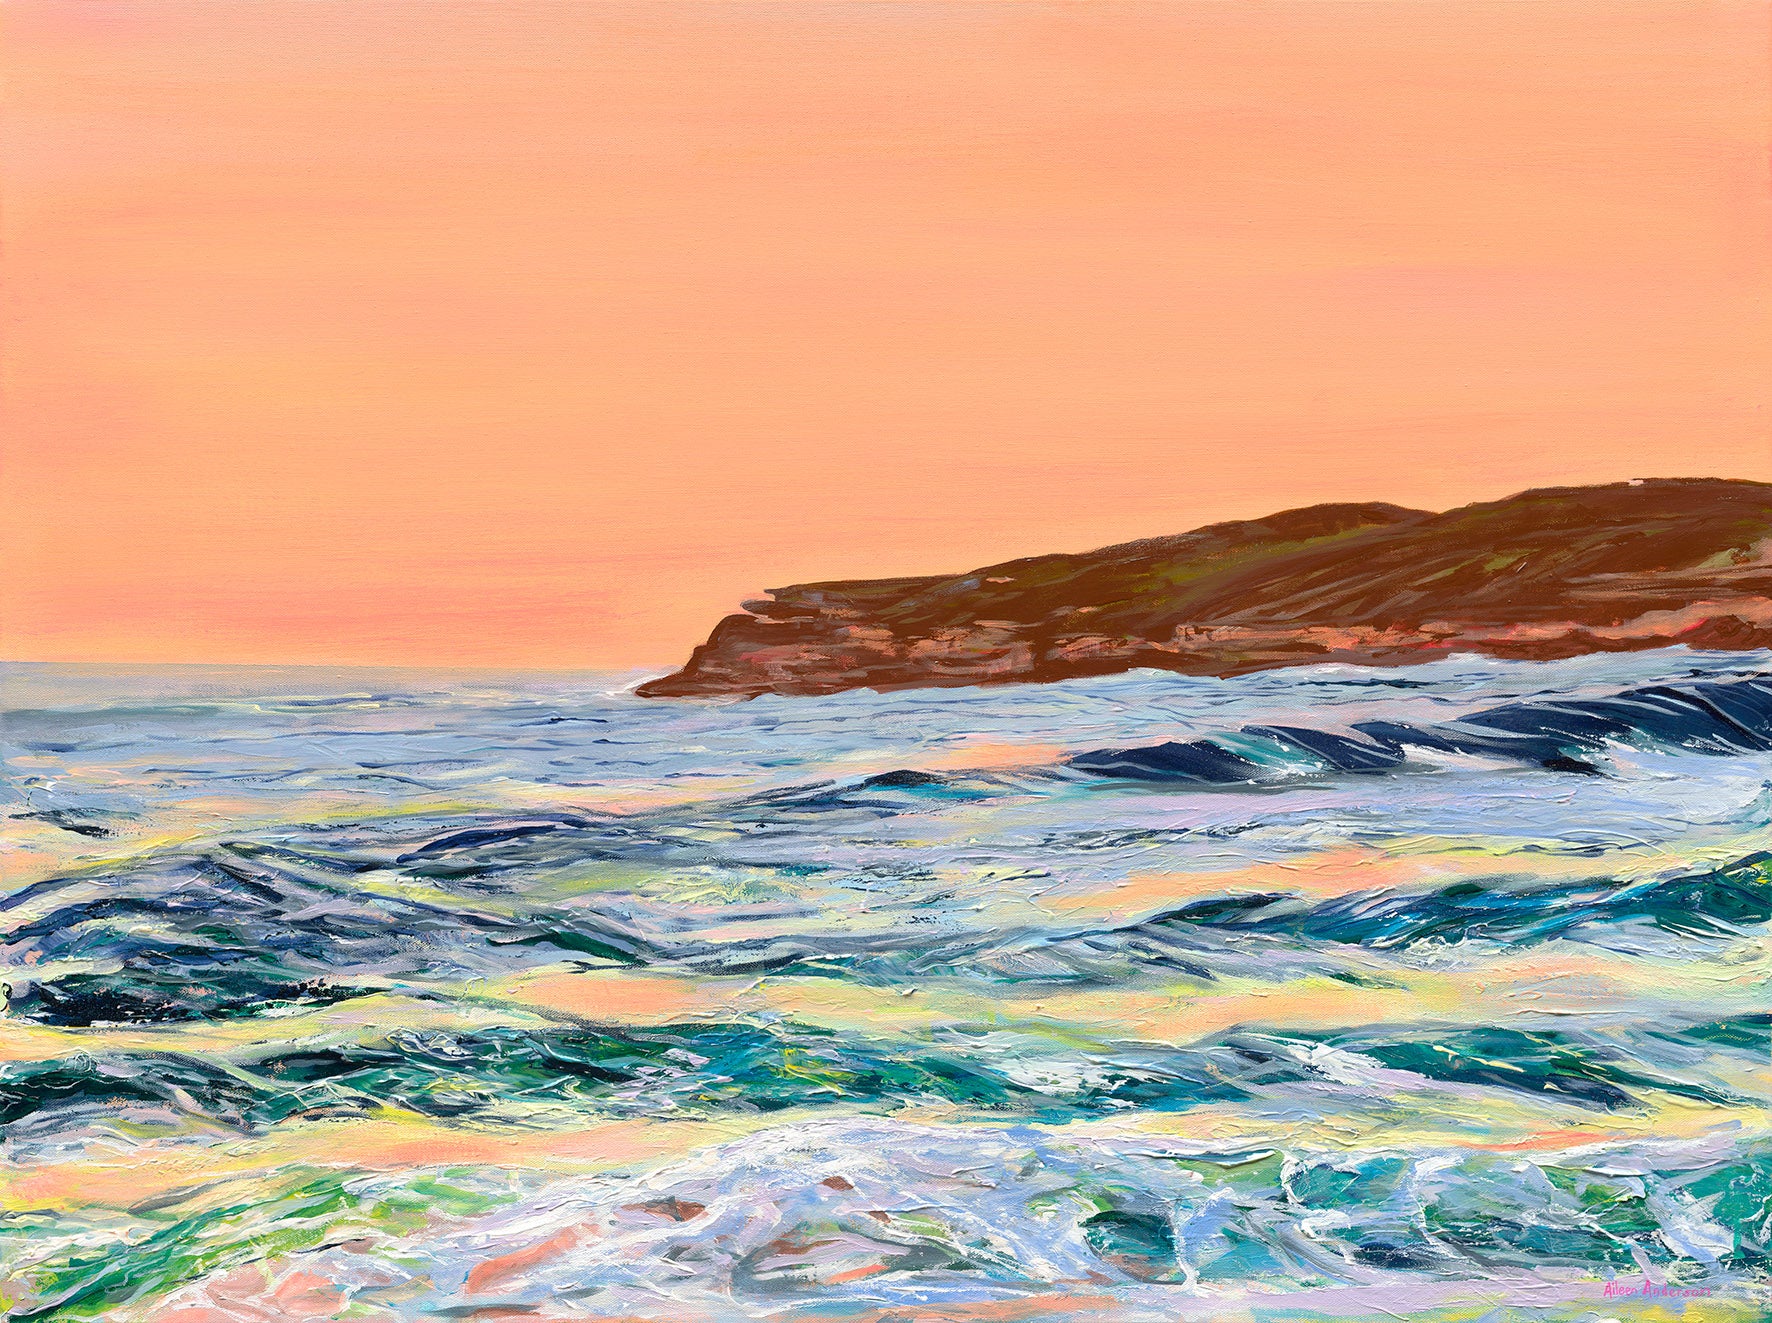 South Maroubra Glow 'Malabar Headland' by Aileen Anderson (copyright) 